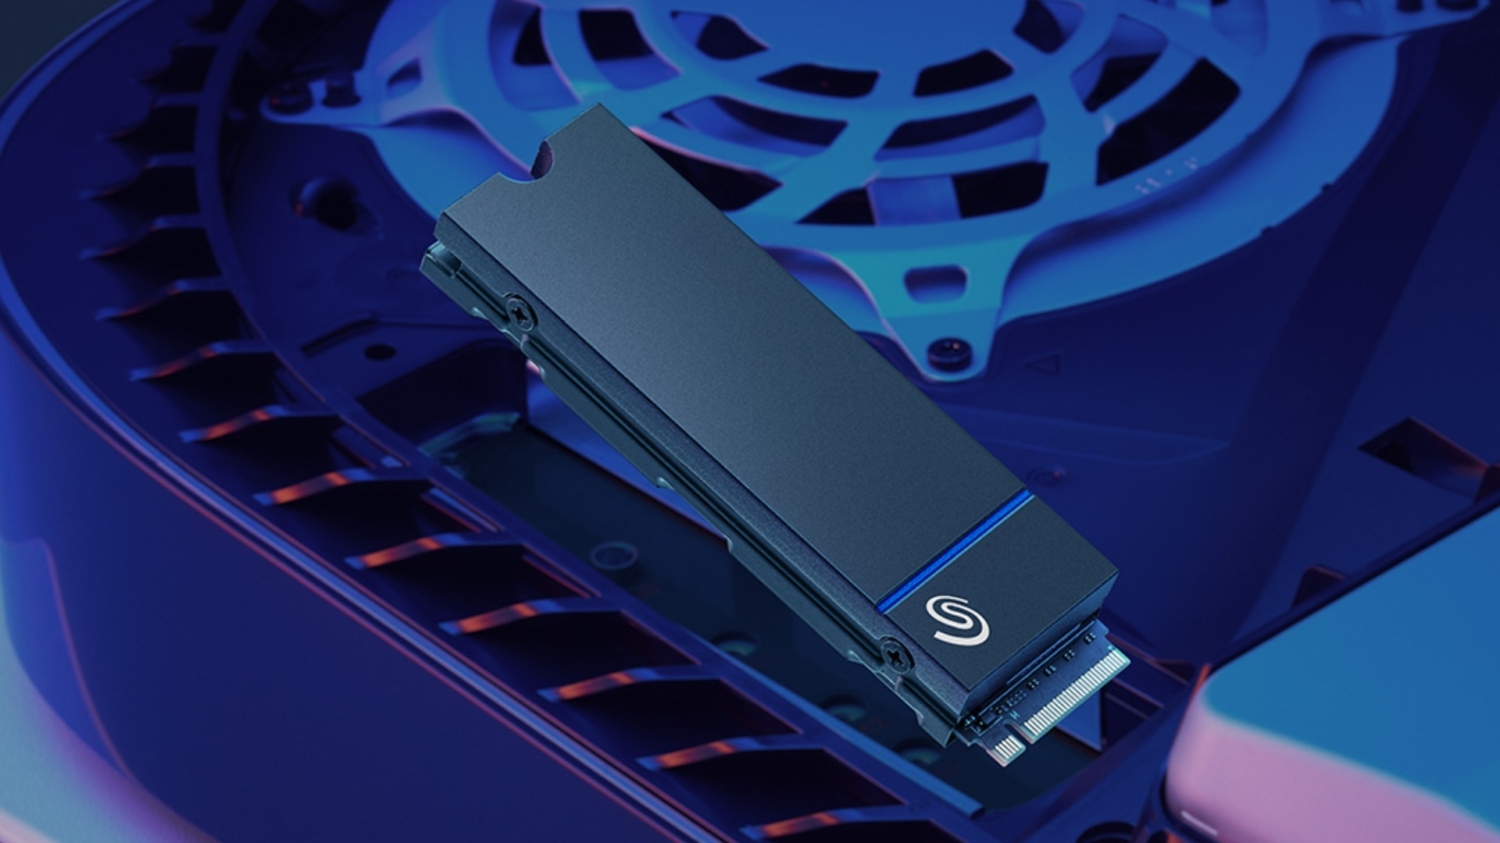 https://static.tweaktown.com/news/9/3/93740_01_seagate-launches-licensed-playstation-5-ssds-with-7300-mb-speeds-and-up-to-4tb-of-storage_full.jpg